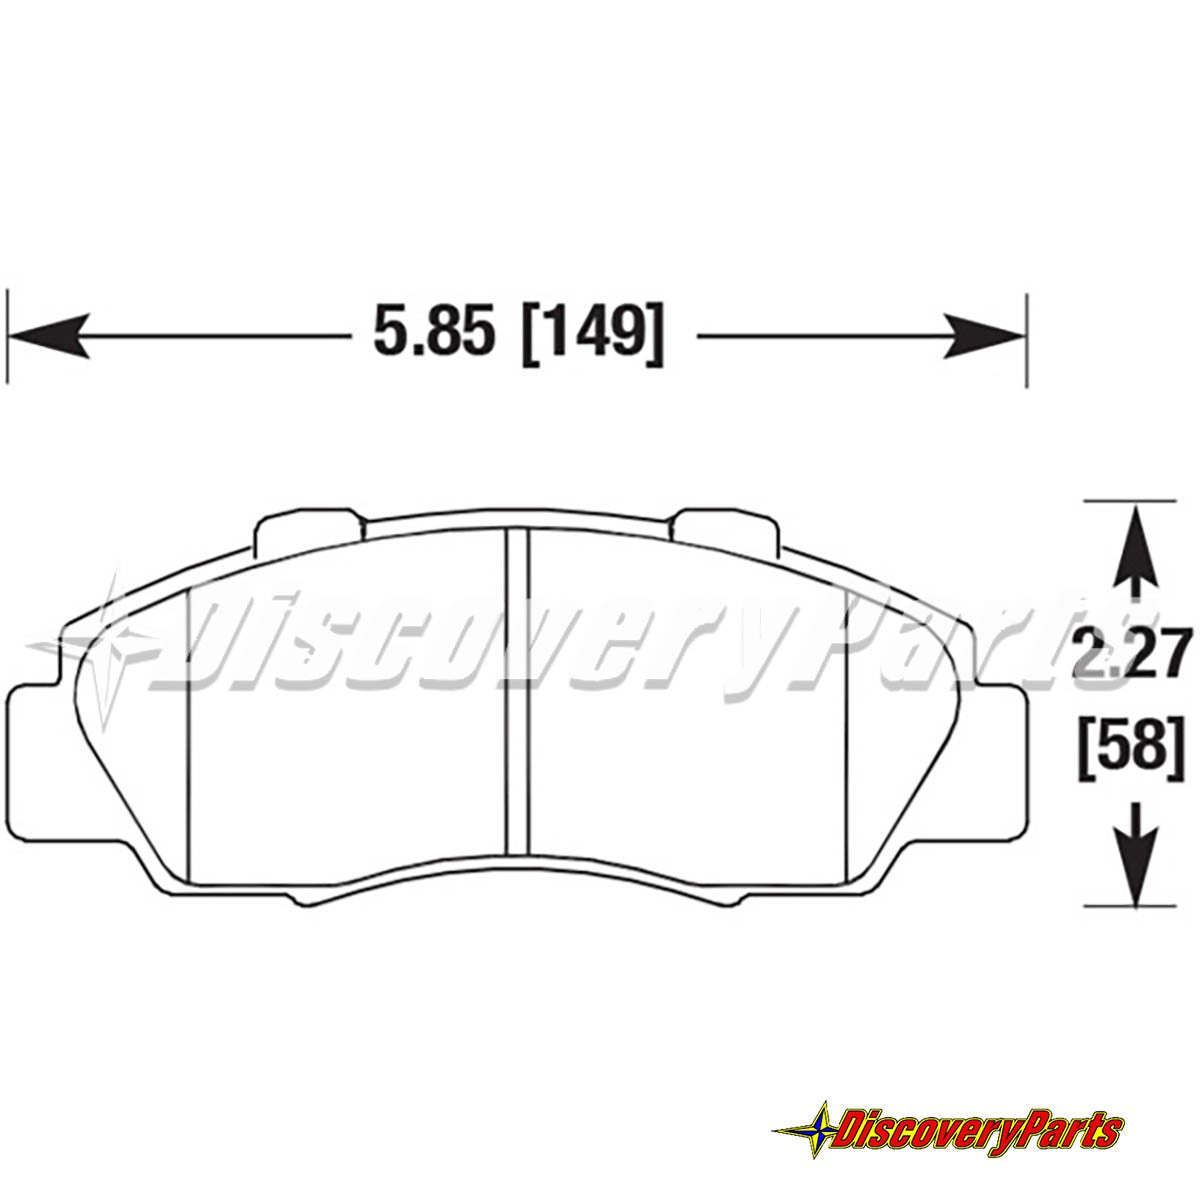 Carbotech CT503 Acura Integra Type R Front Brake Pad Set